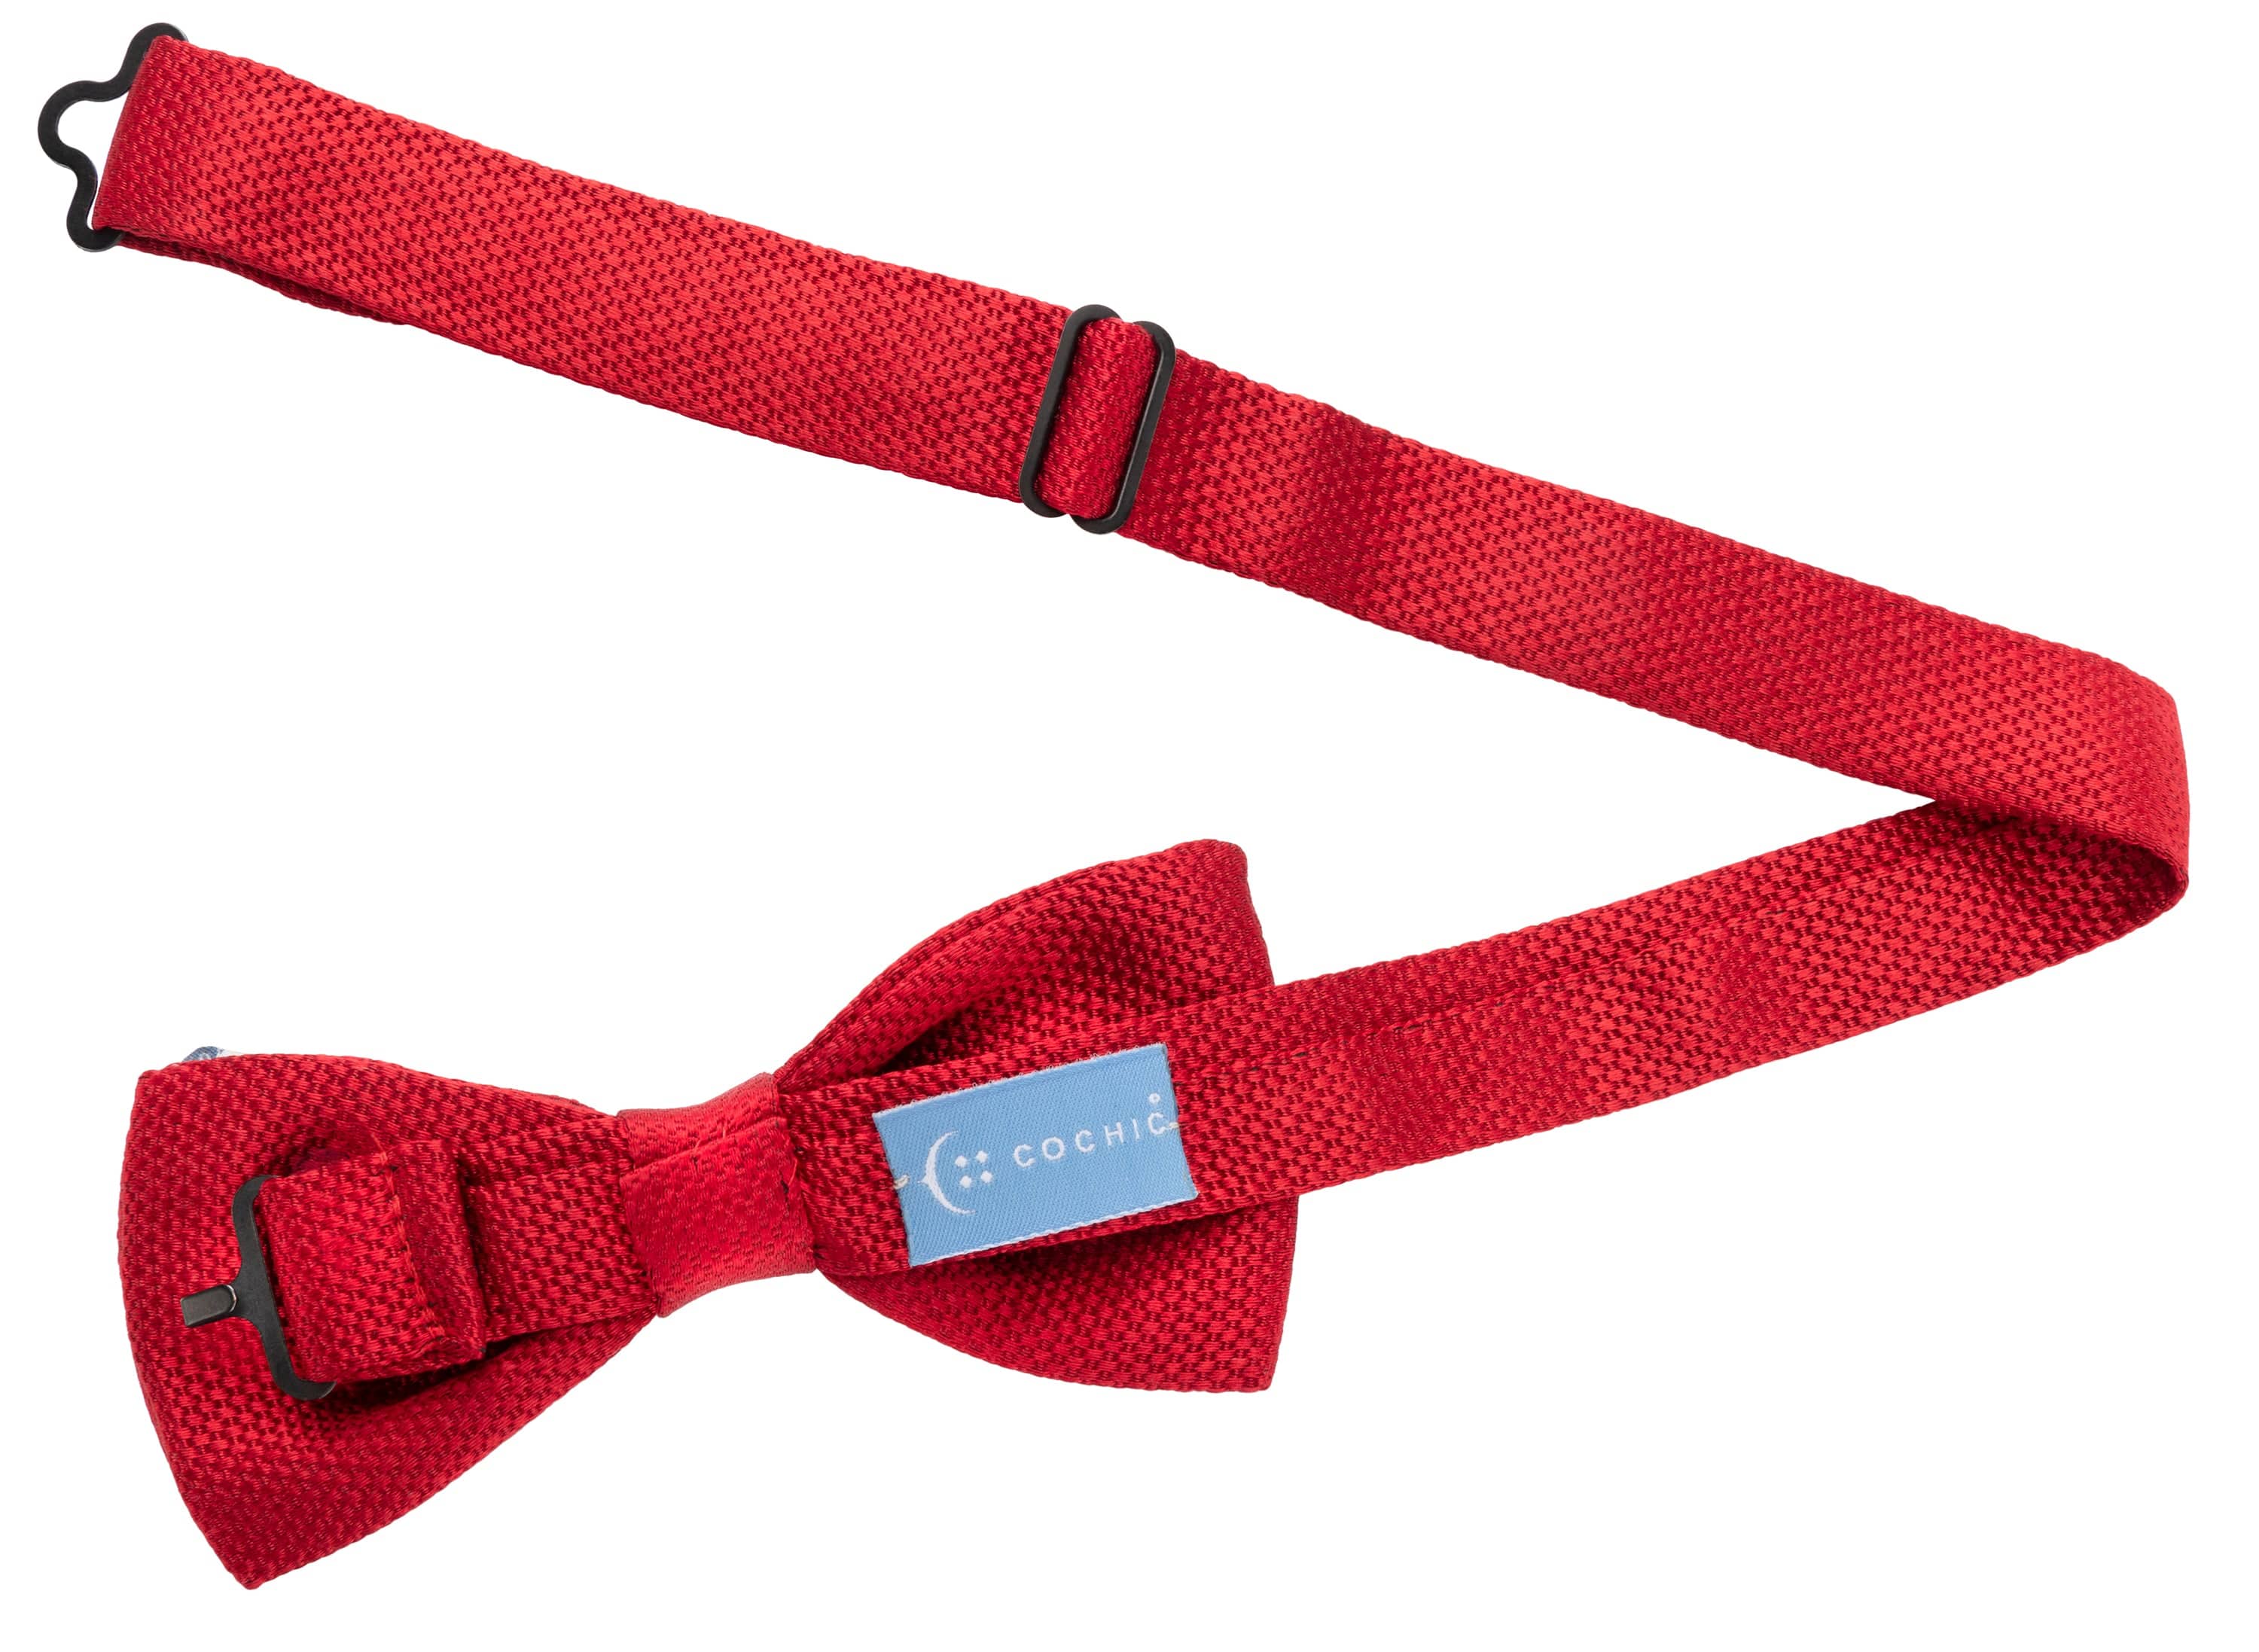 Rosso Bow Tie (Silk and Cotton, Red and Navy)